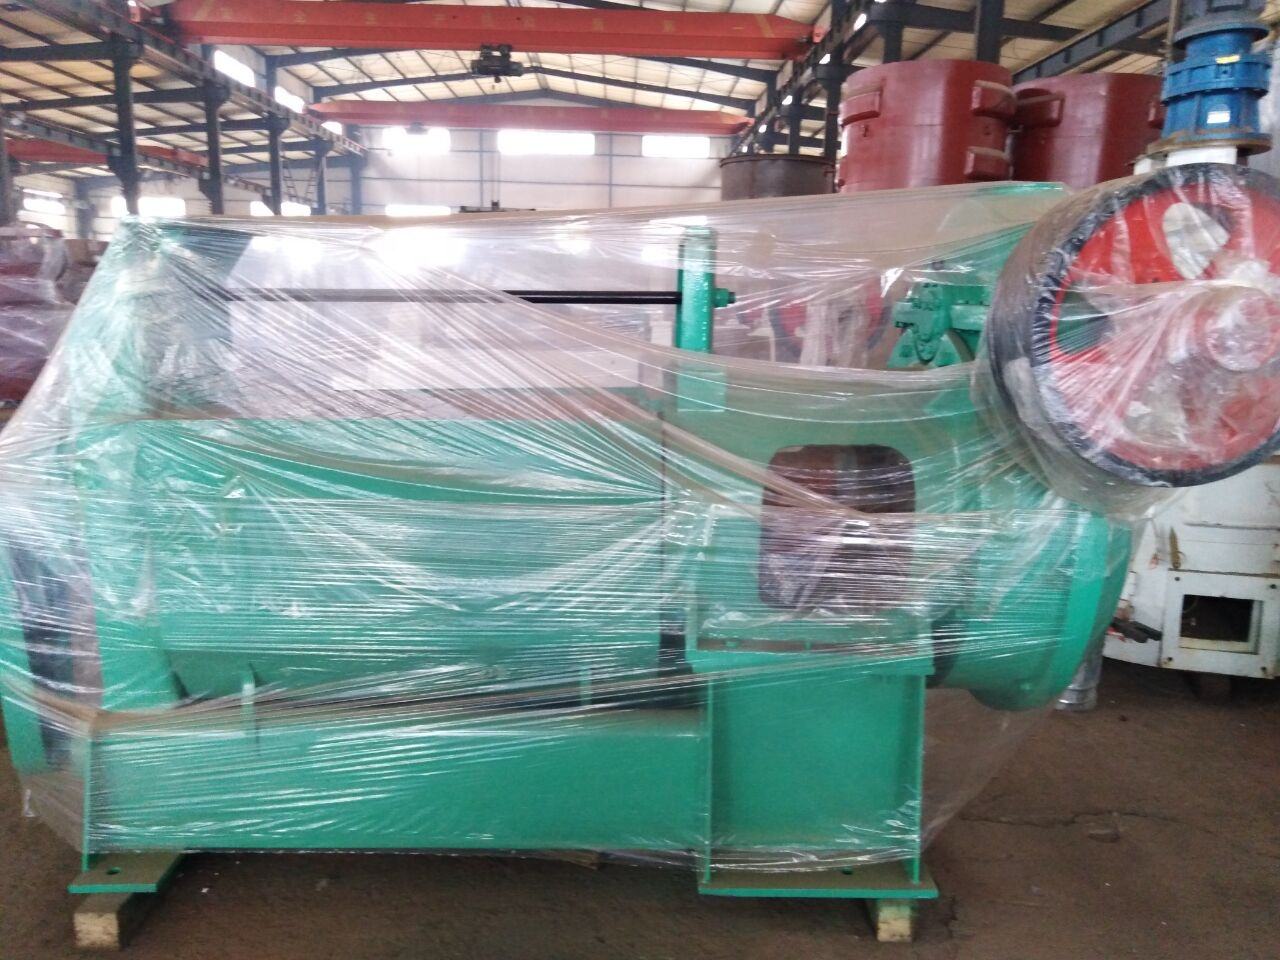 coconut palm cotton sunflower seed oil first press line expeller extracting machine